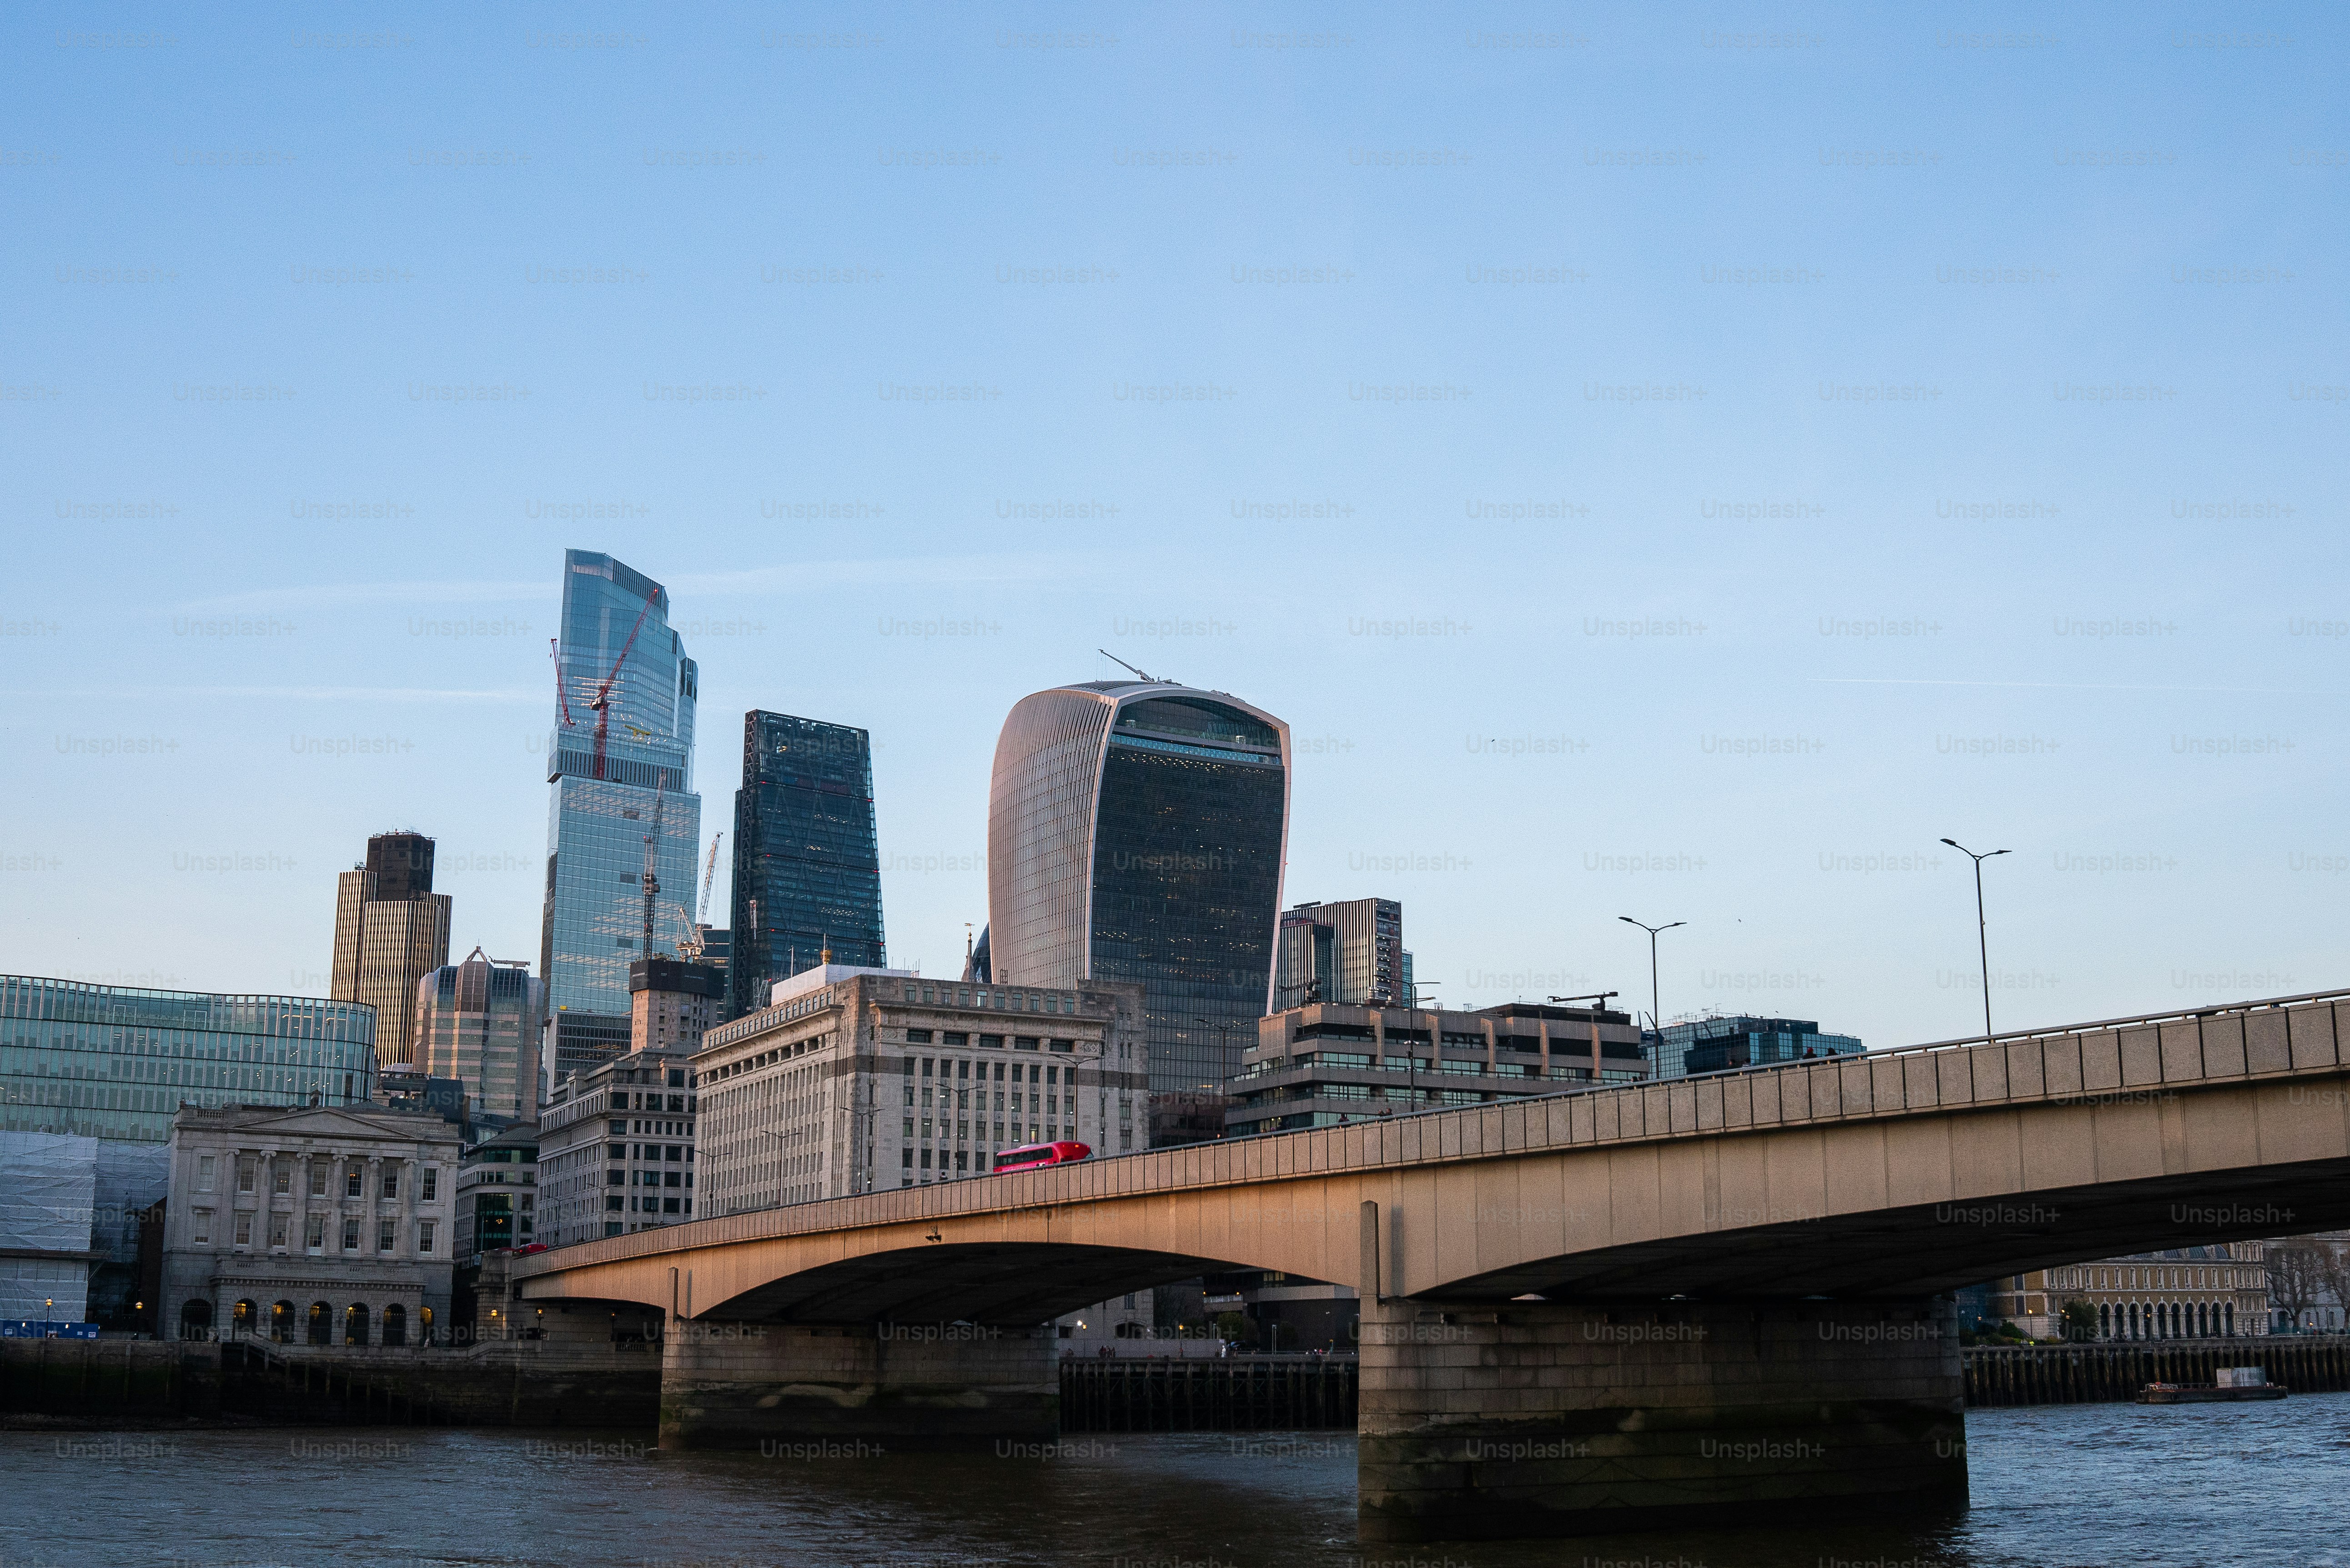 Sunset photo of the walkie-talkie building and London Bridge